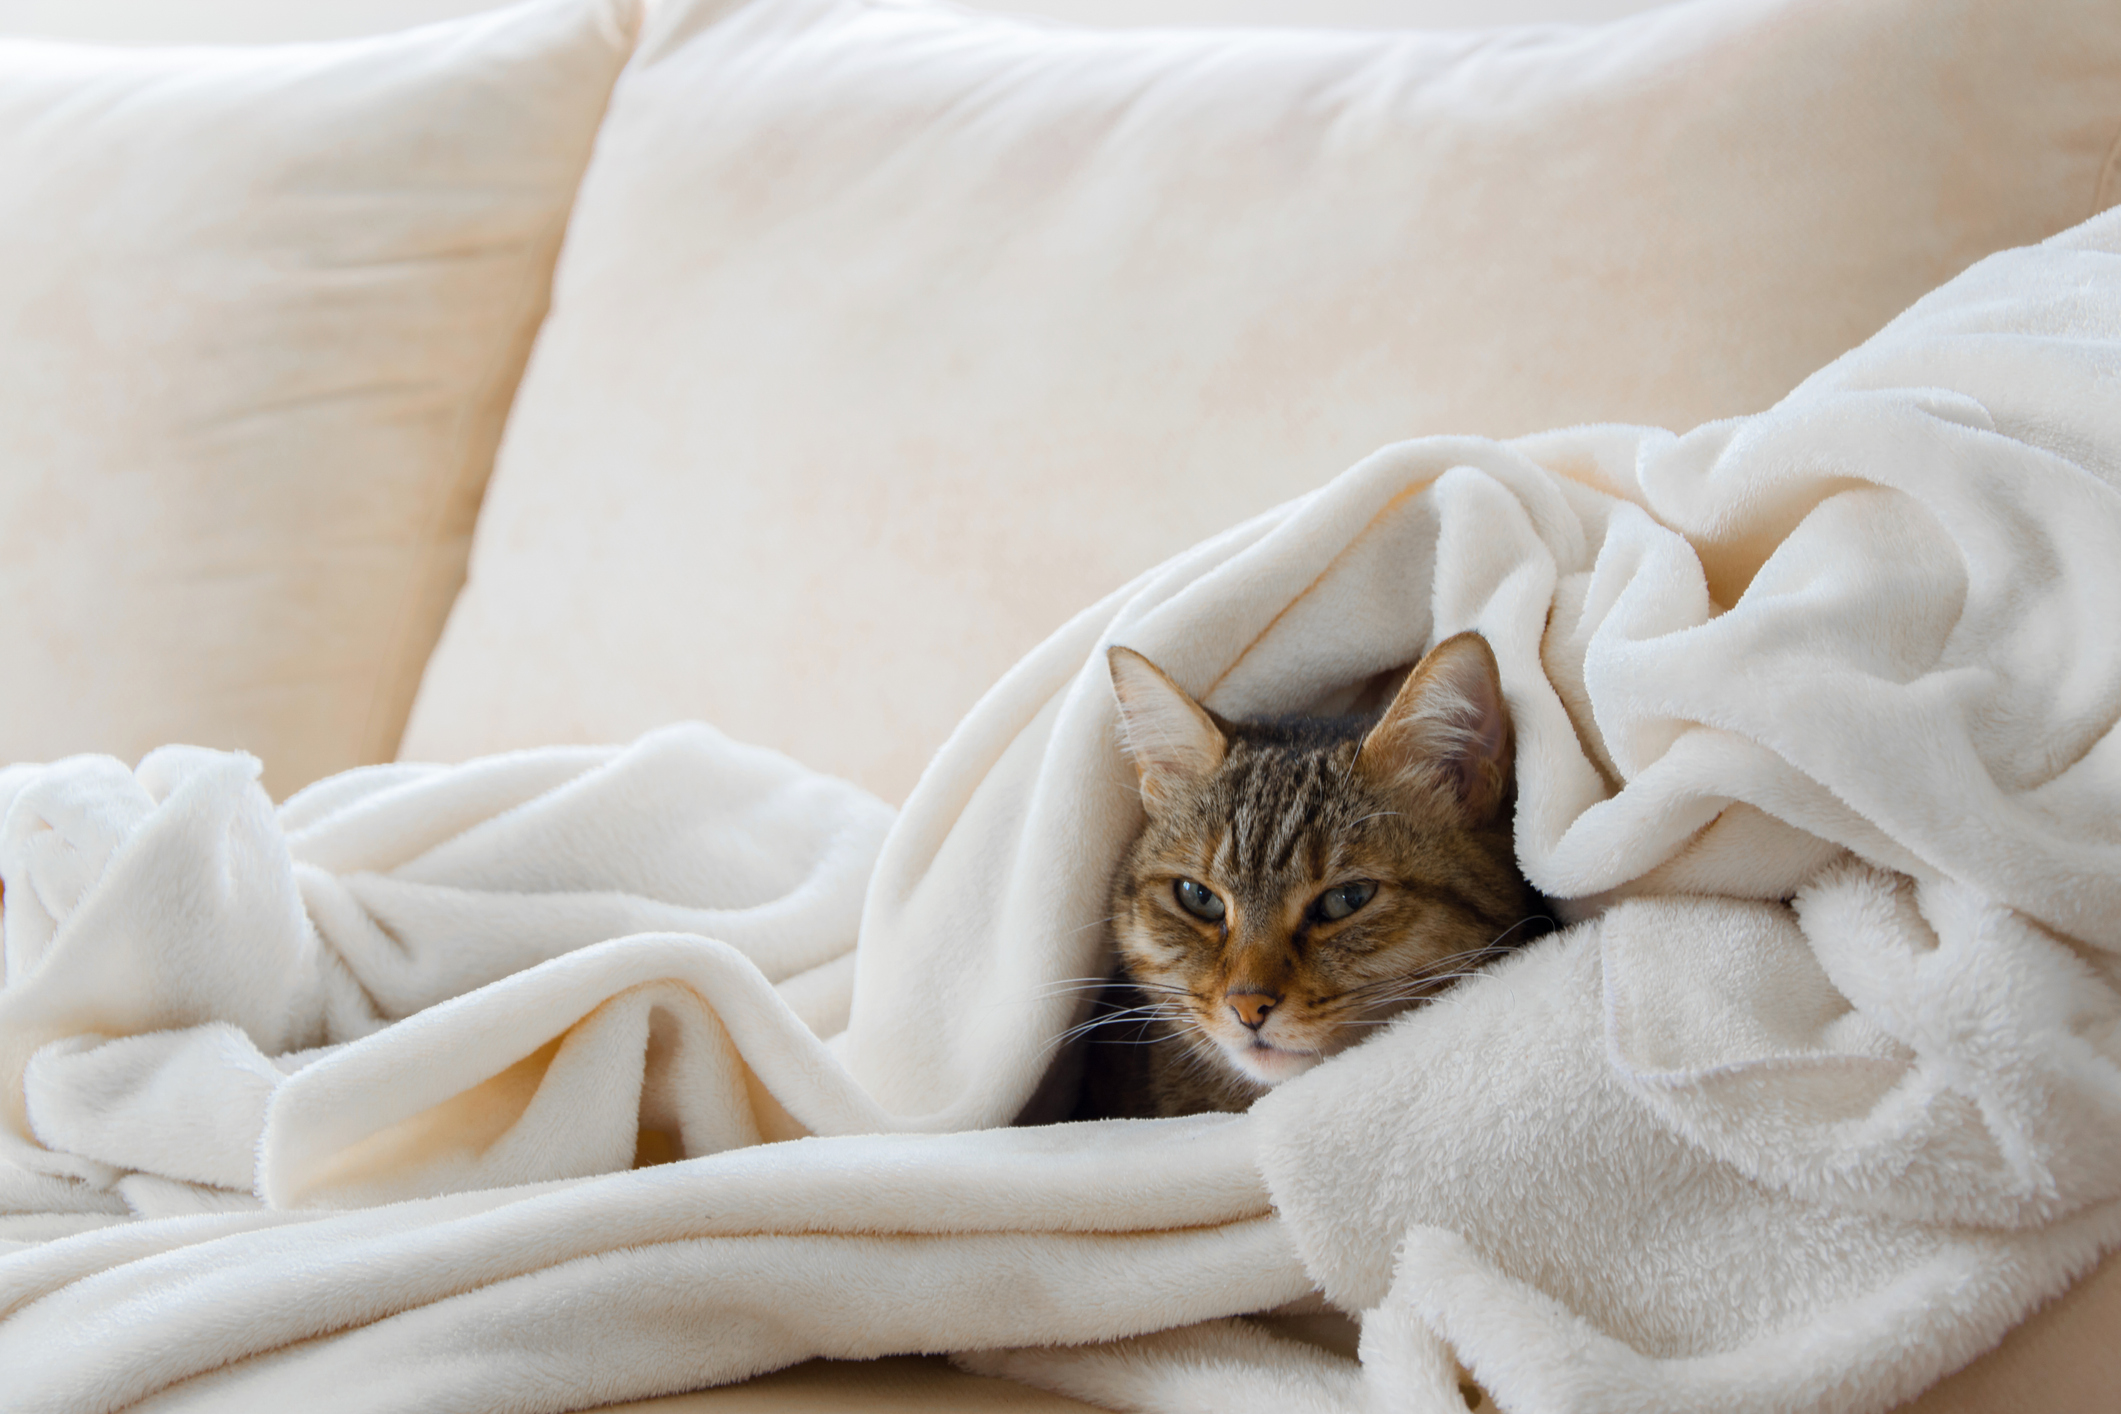 A cozy cat hides in a fuzzy white blanket